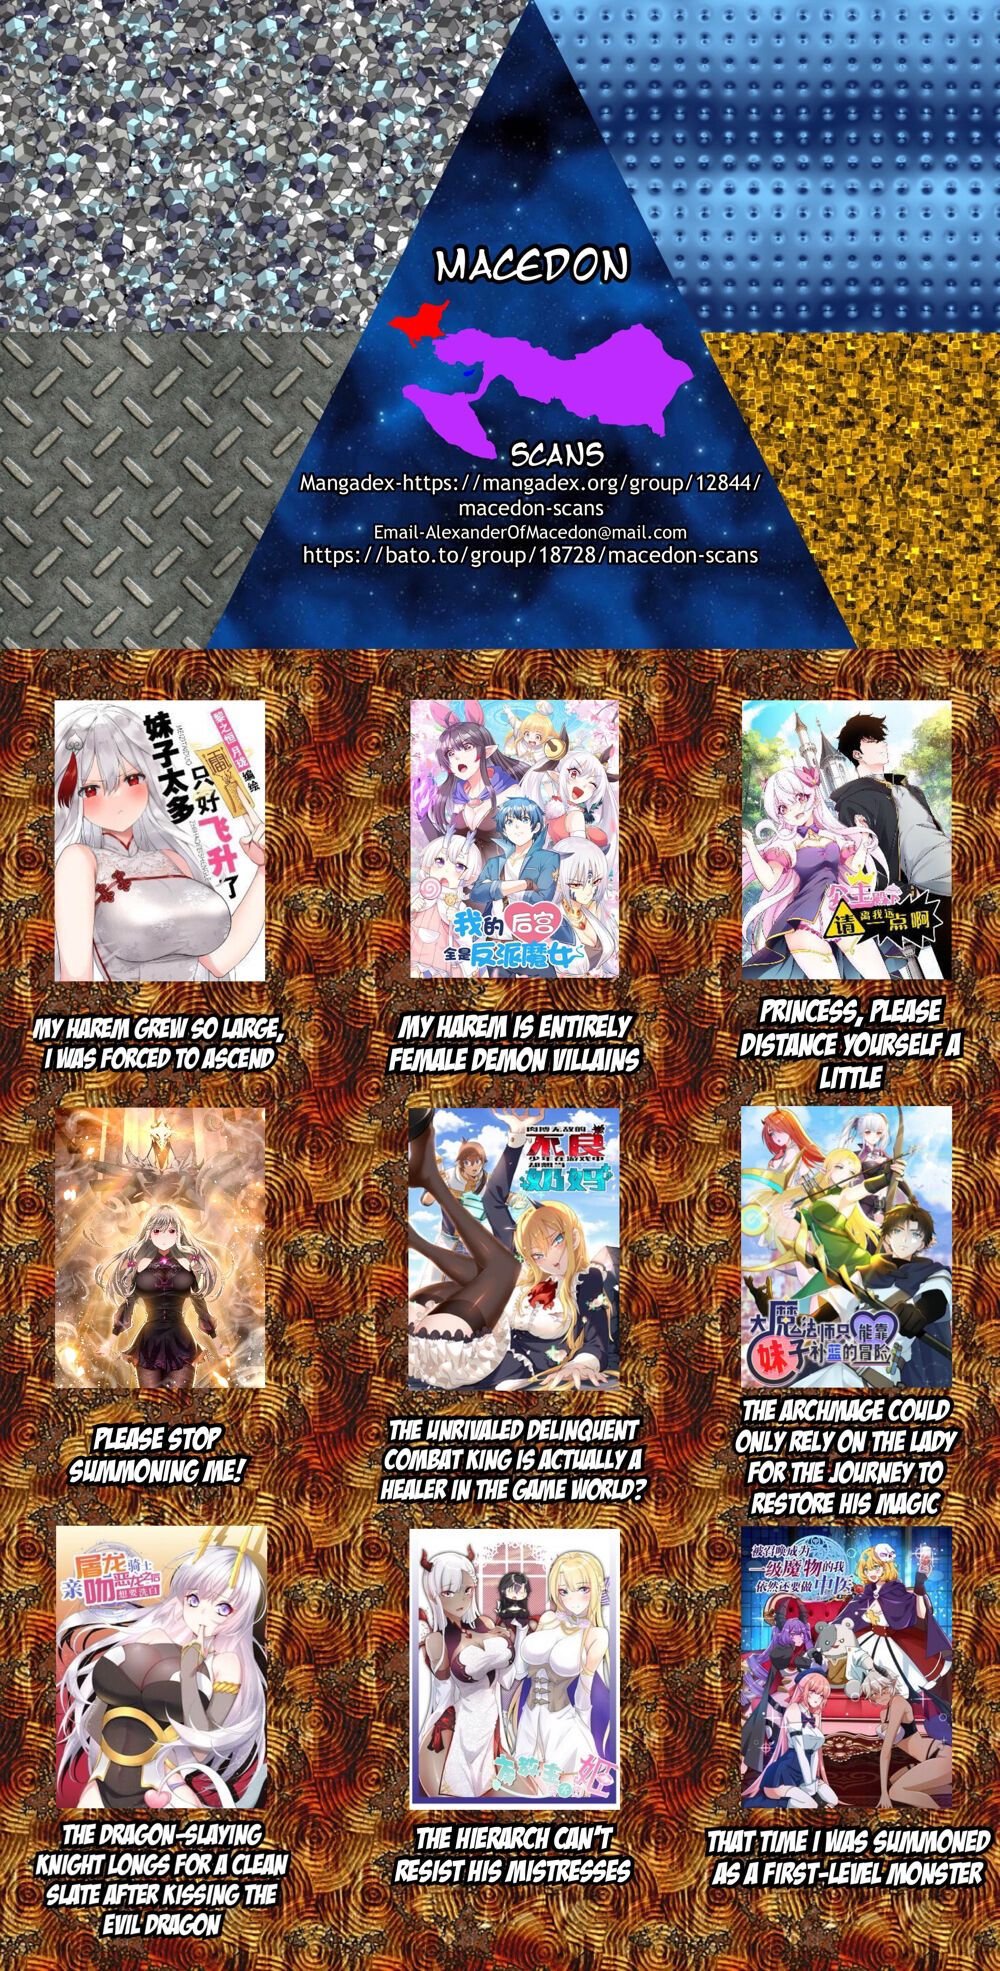 My Harem Is Entirely Female Demon Villains chapter 21